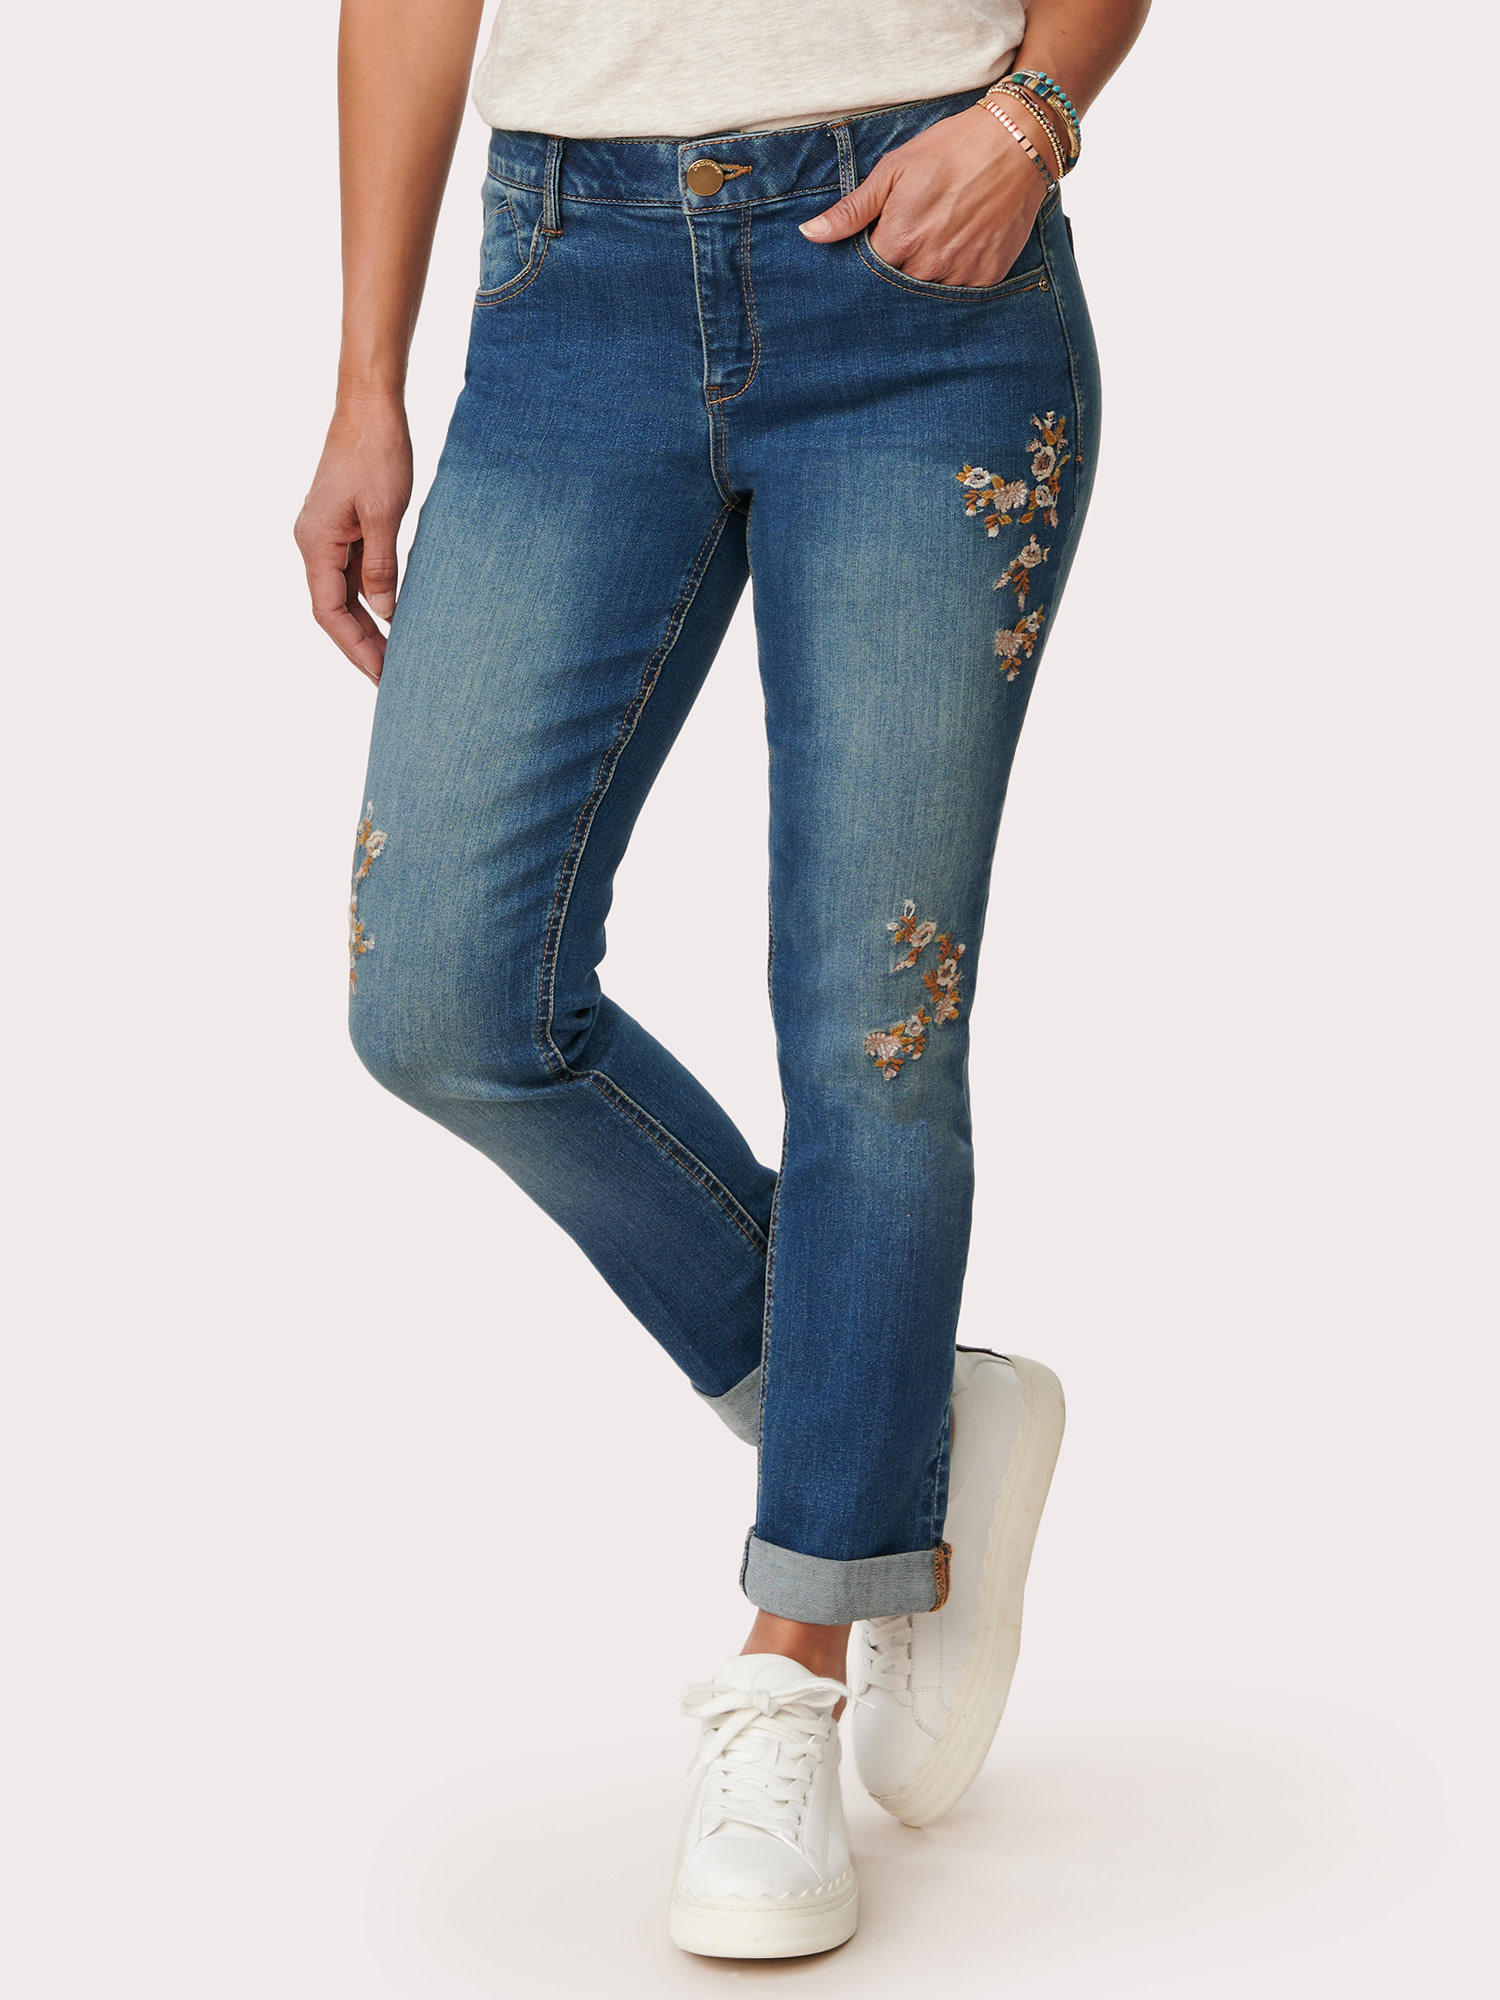 Democracy "Ab"solution® Roll Cuff Floral Embroidered Girlfriend Jean